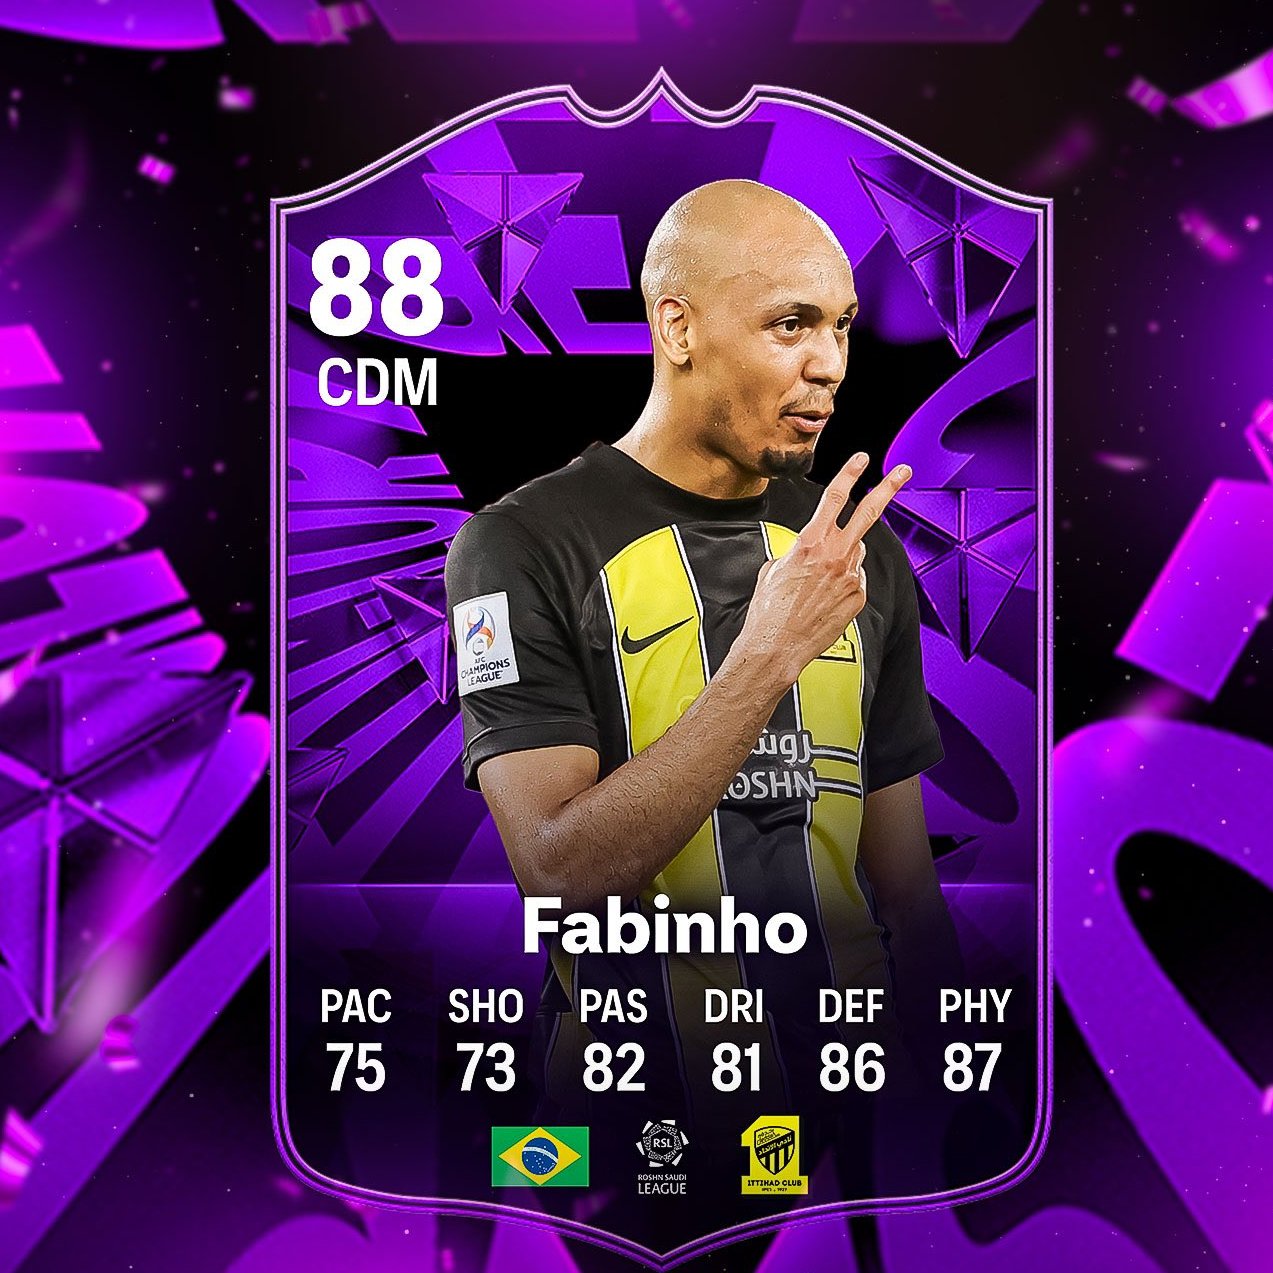 FUT Sheriff - Fabinho 🇧🇷 is coming as FC PRO LIVE player